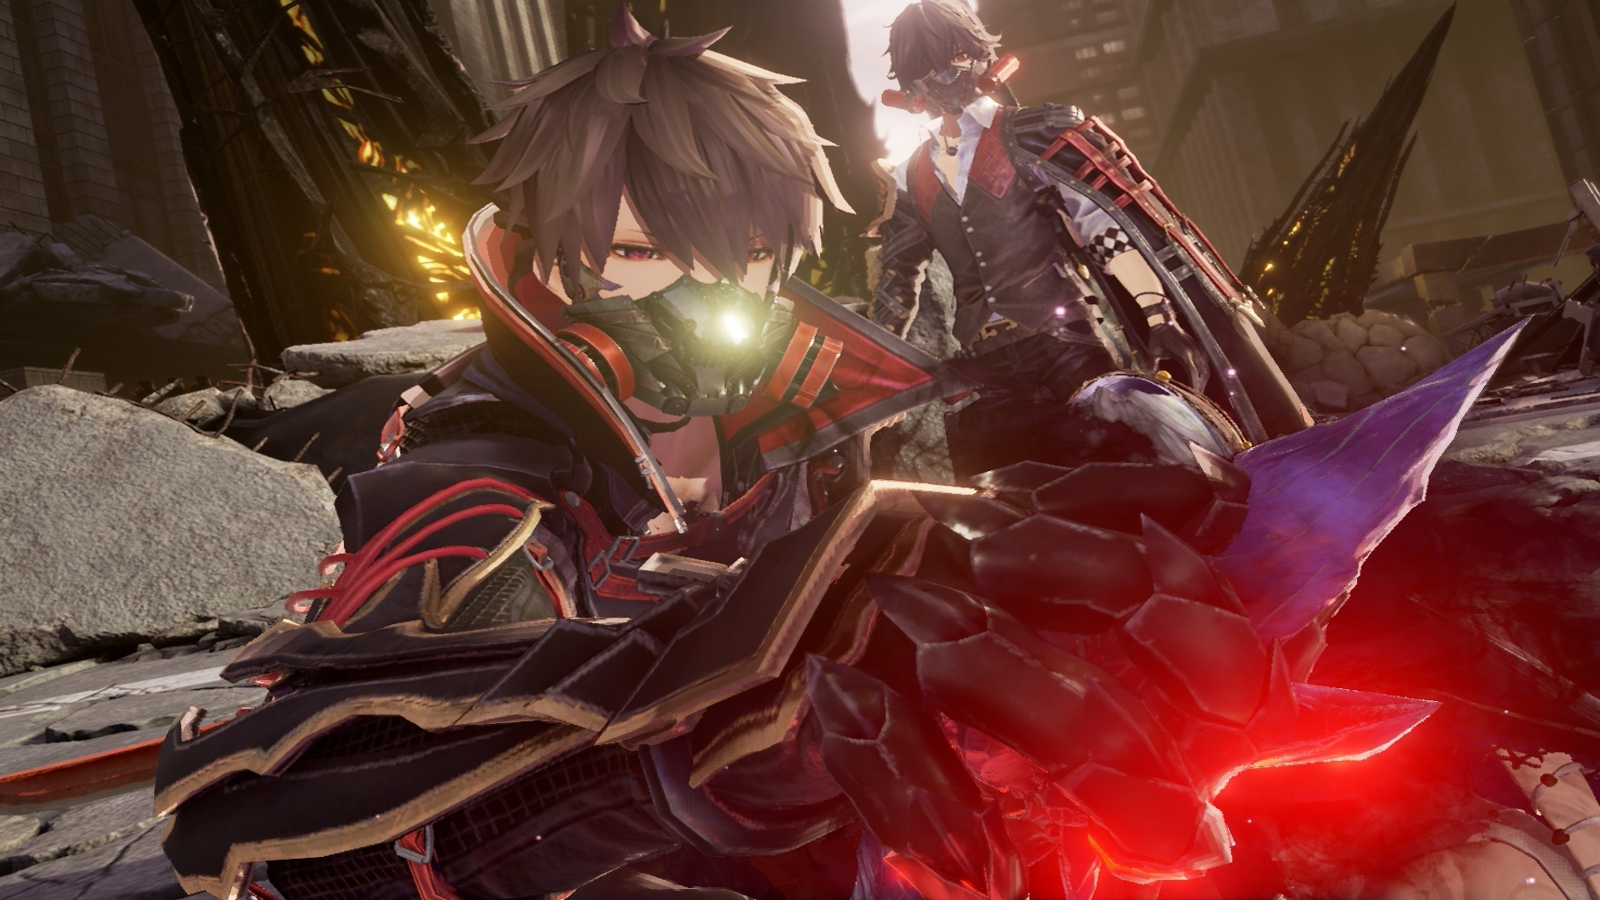 Code Vein [PS4 Game Review]